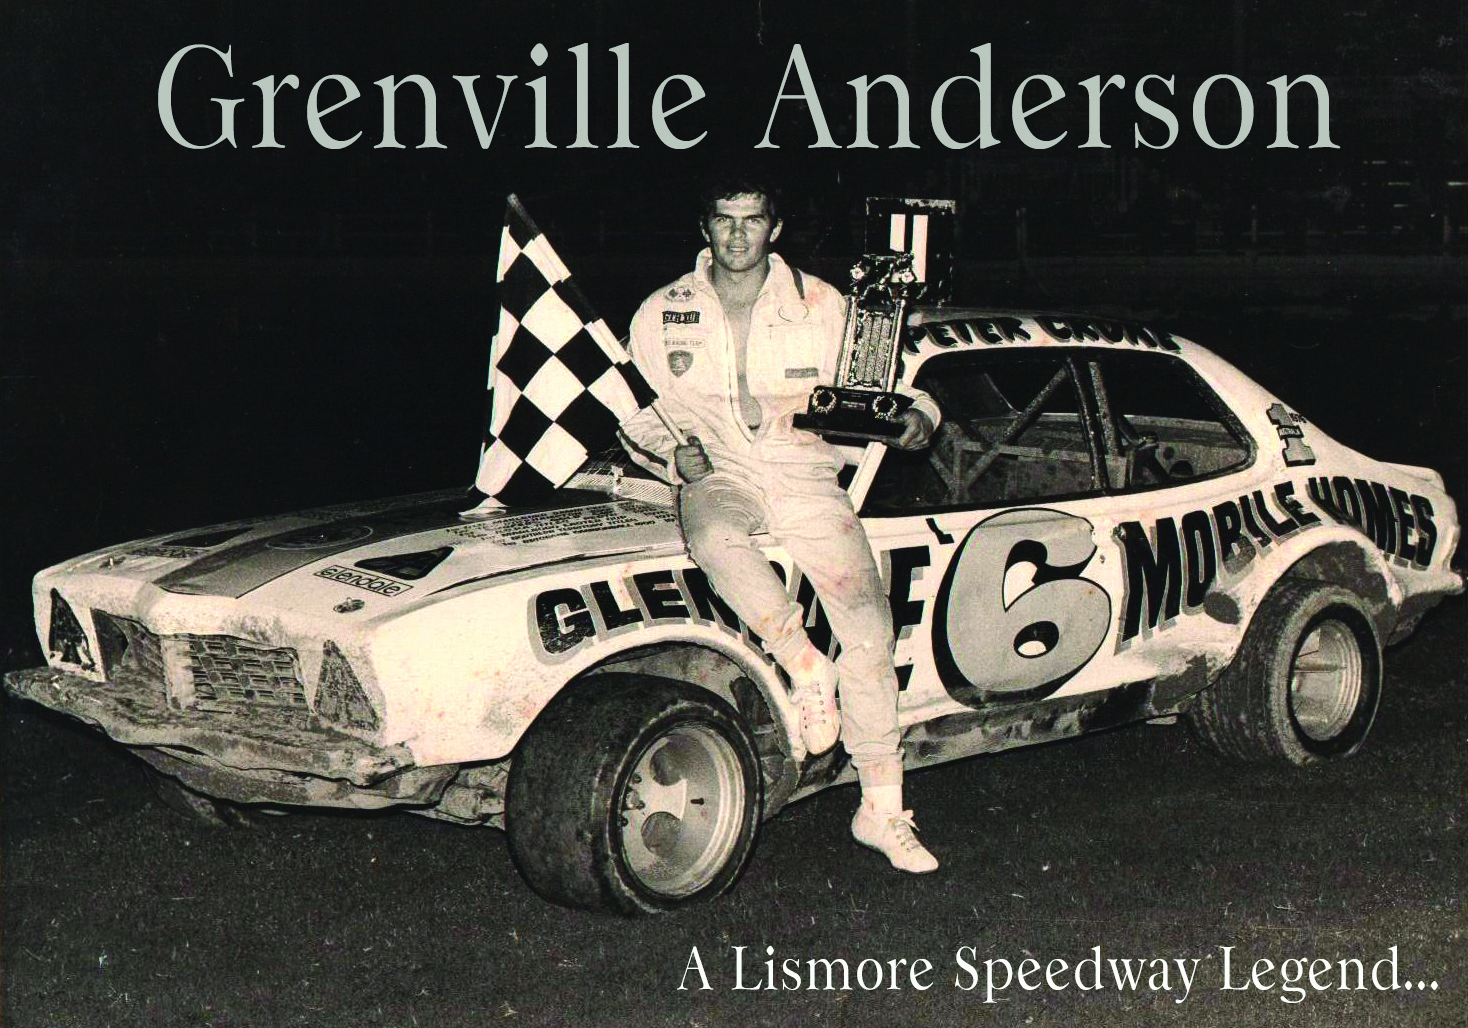 Championship trophies were common for the late, great Grenville Anderson during his wonderful career.